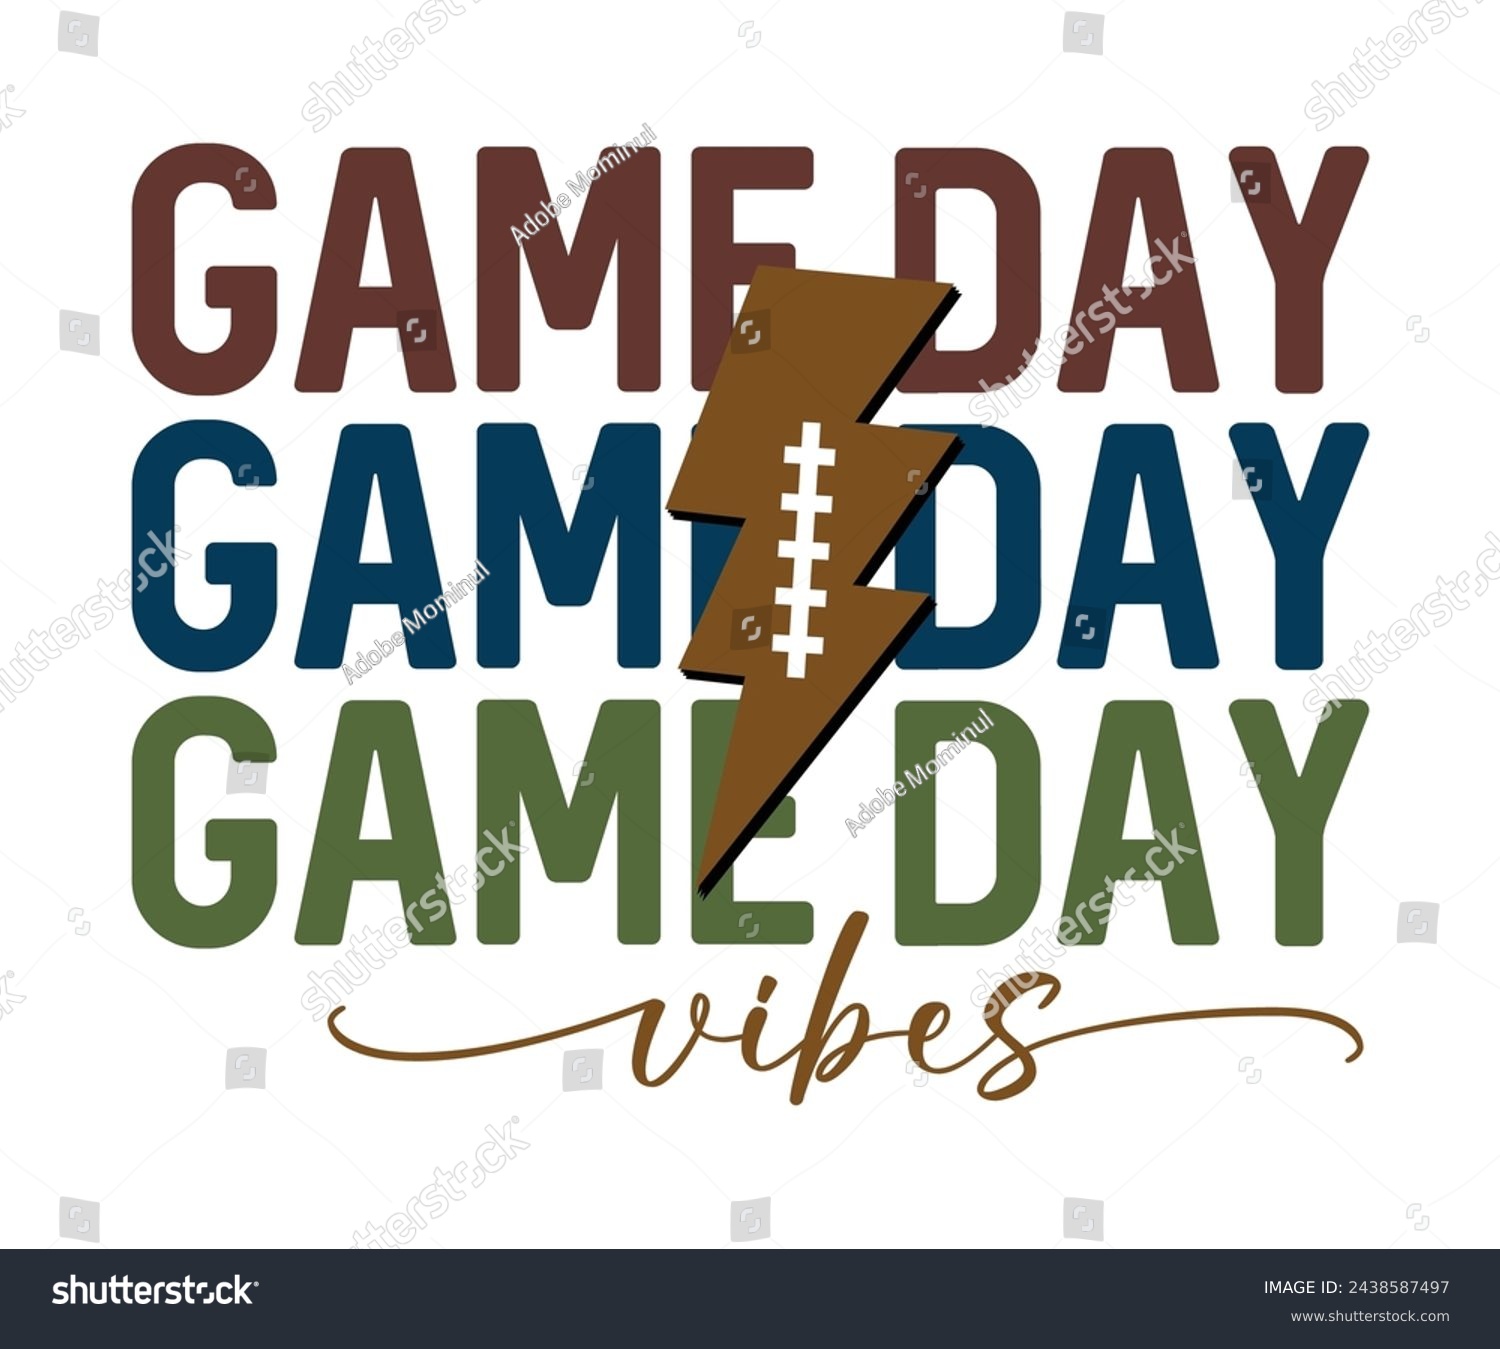 SVG of Game Day Vibes,Football Svg,Football Player Svg,Game Day Shirt,Football Quotes Svg,American Football Svg,Soccer Svg,Cut File,Commercial use svg